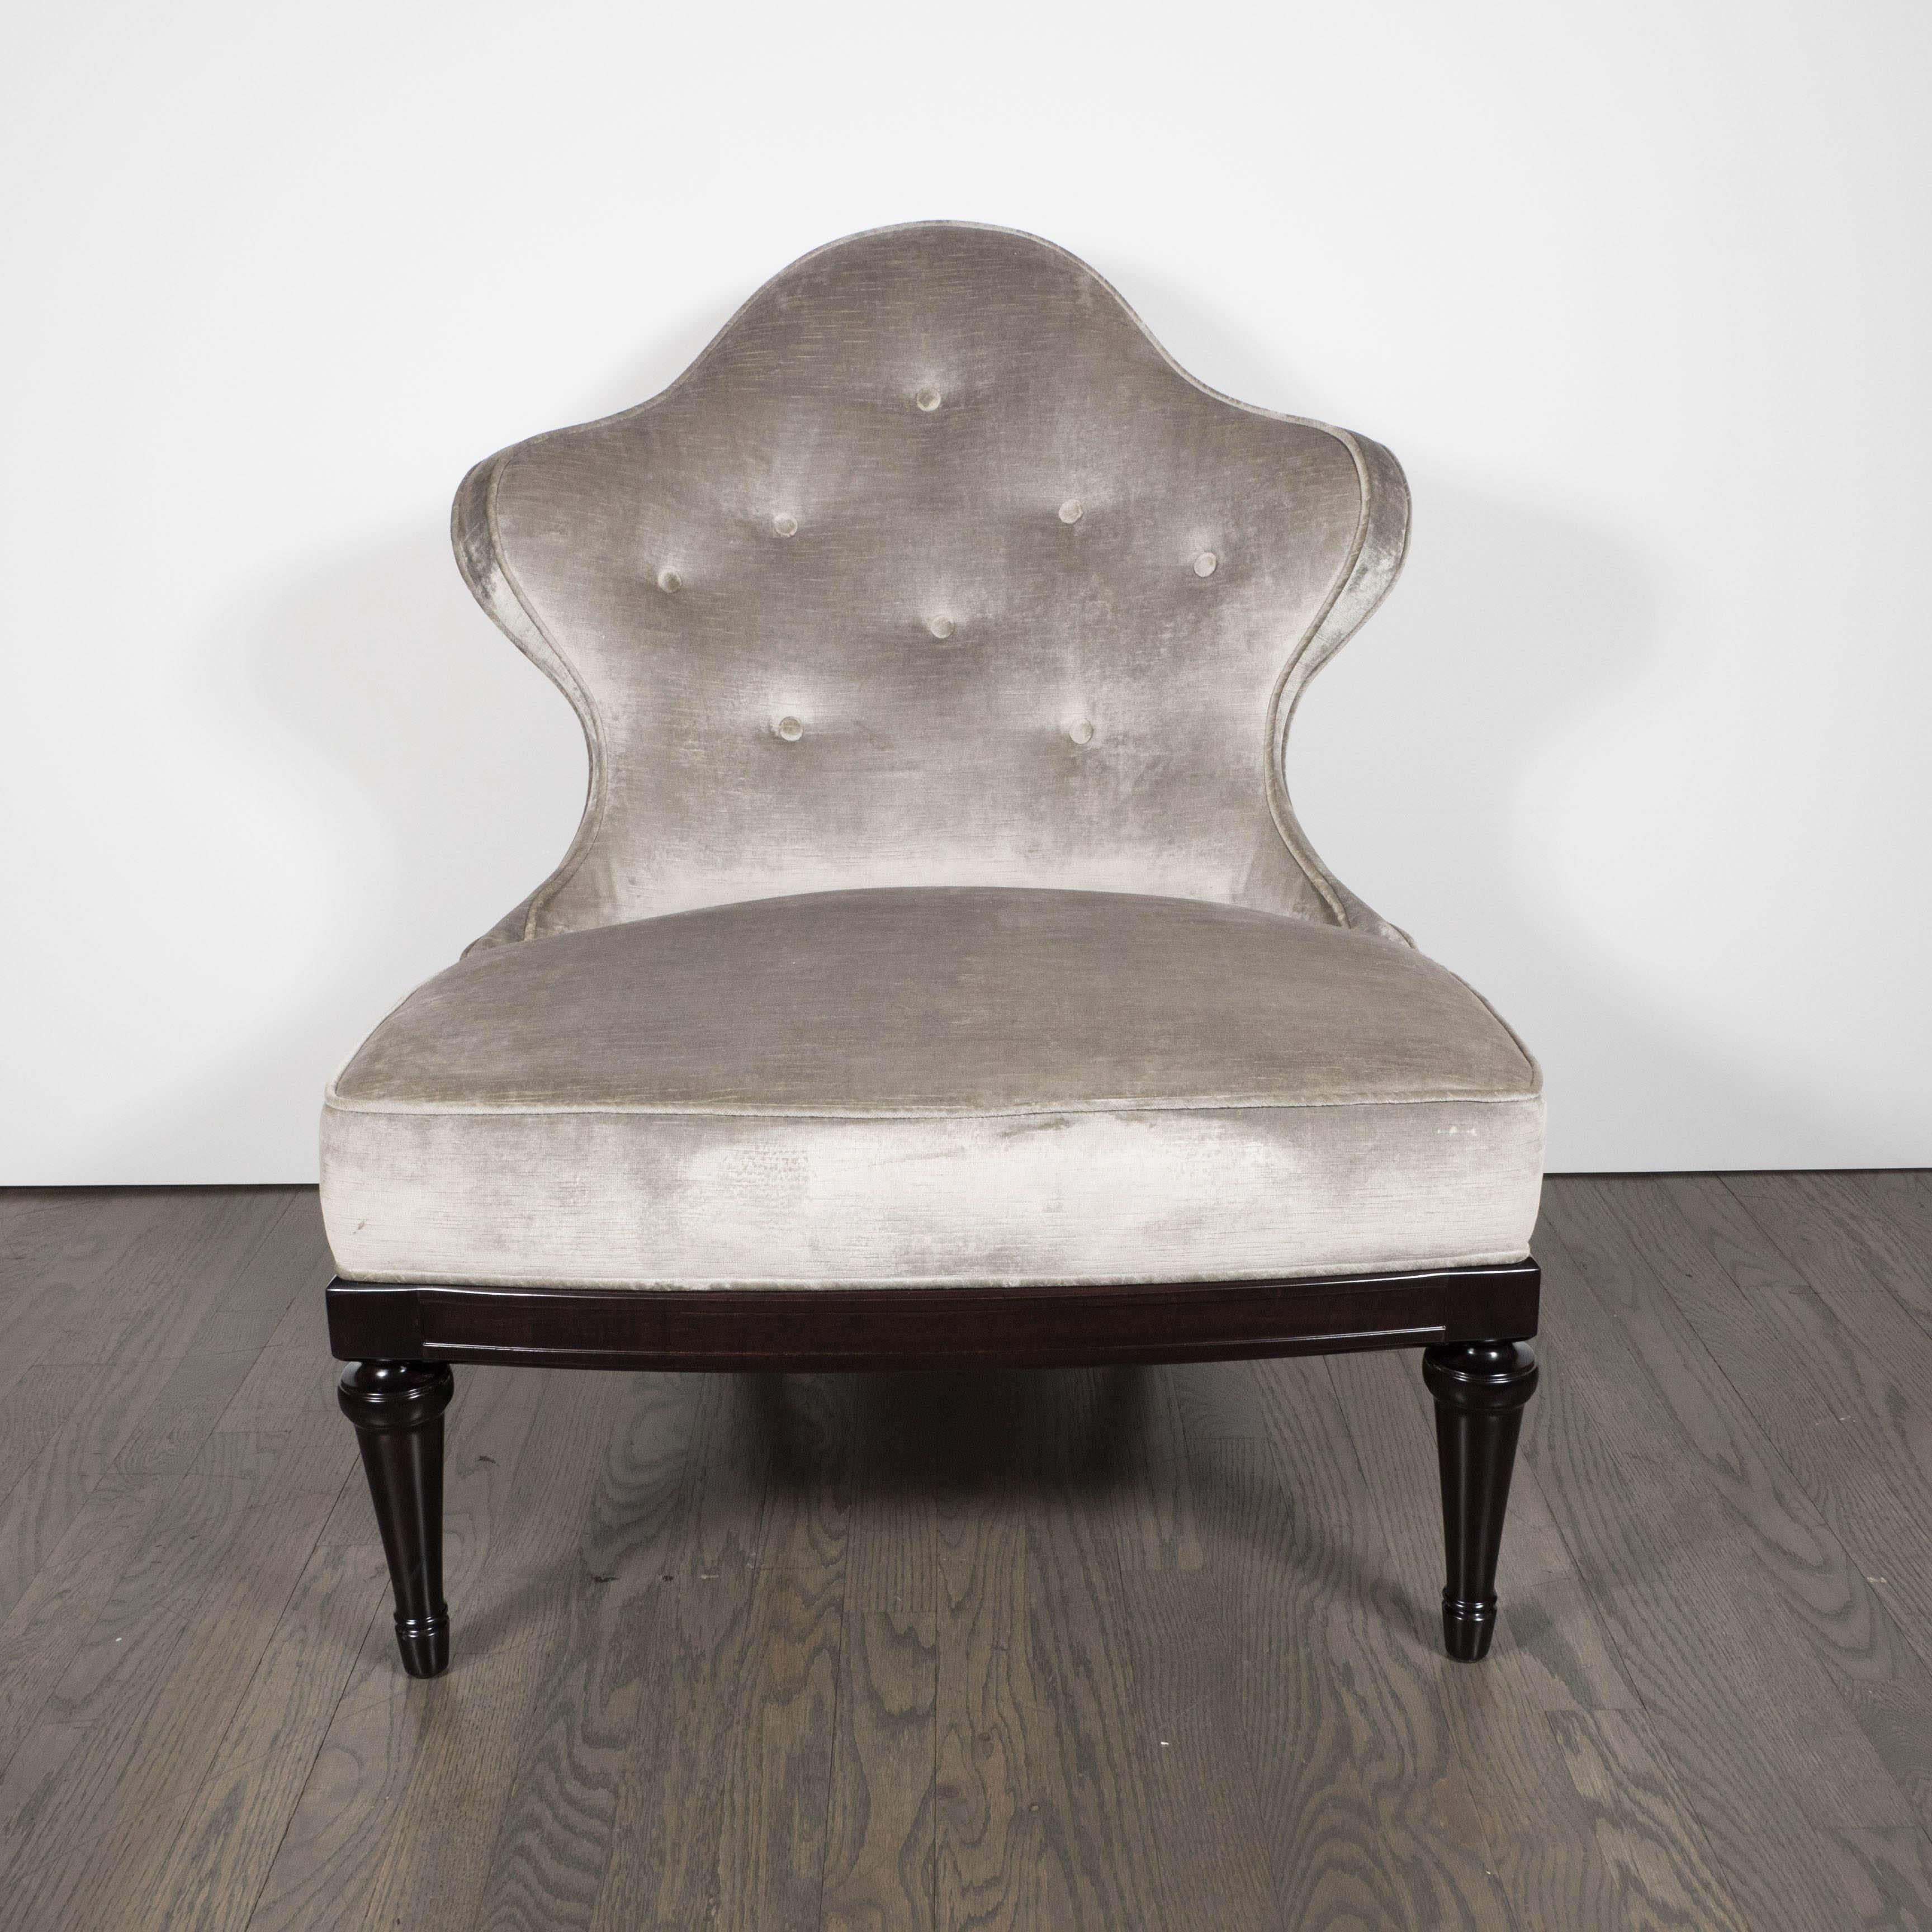 A 1940s Hollywood Regency crest-back button-tufted slipper chair in platinum velvet. Detailed legs and base in lacquered ebonized walnut support a button-tufted seat back and secured cushion. The piece is newly upholstered, piping included, in a